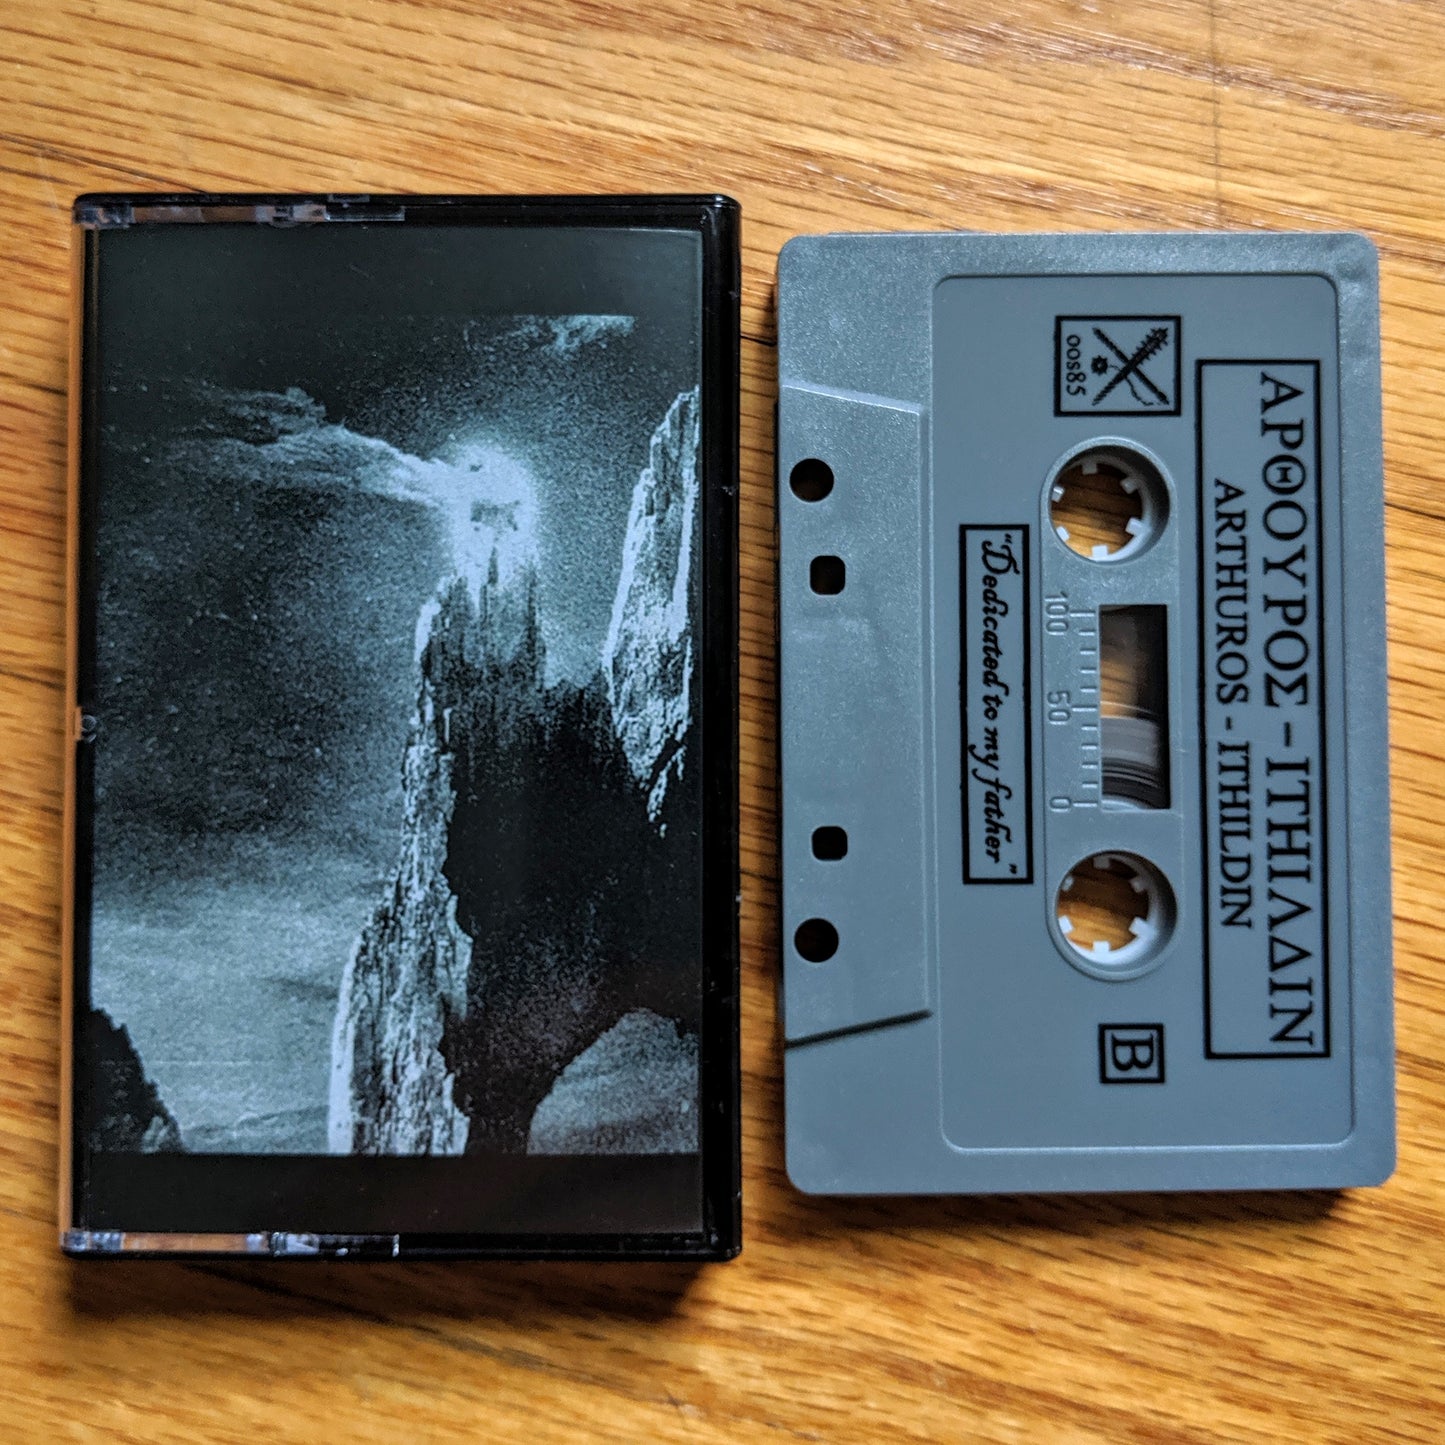 [SOLD OUT] ARTHUROS "Ithildin" Cassette Tape